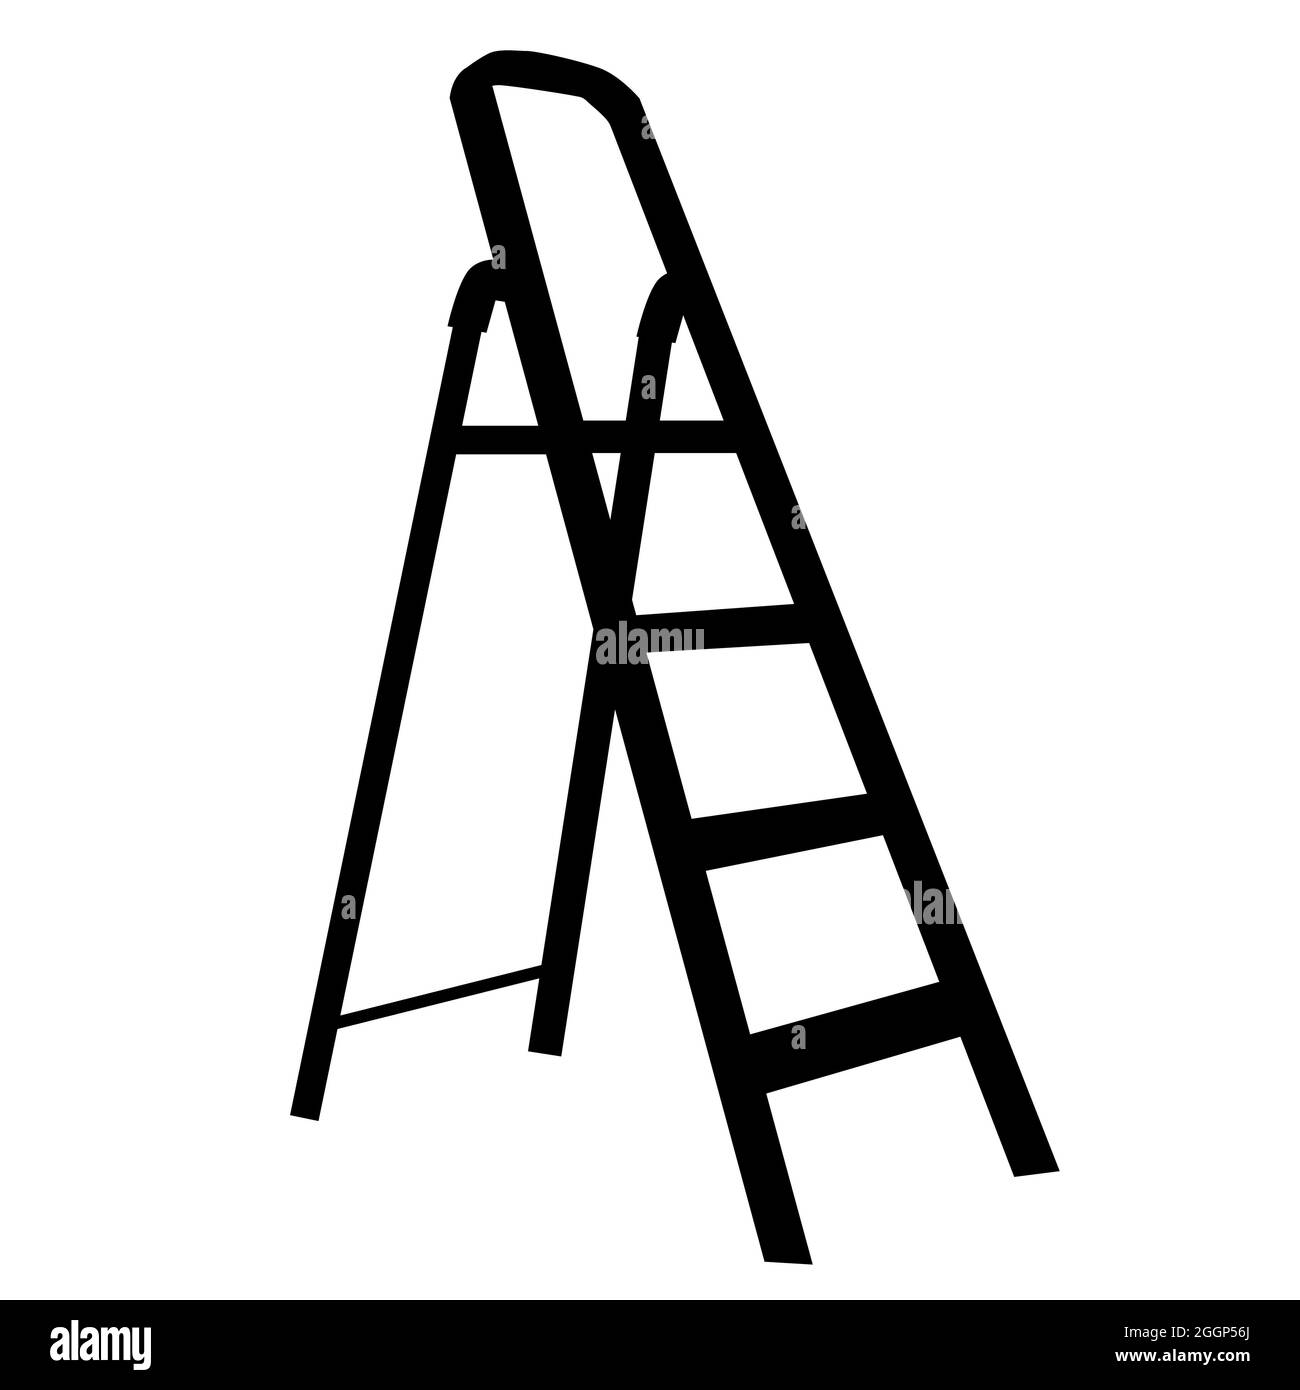 Ladder icon on white background. Metal Step Ladder sign. Stairway symbol. flat style. Stock Photo